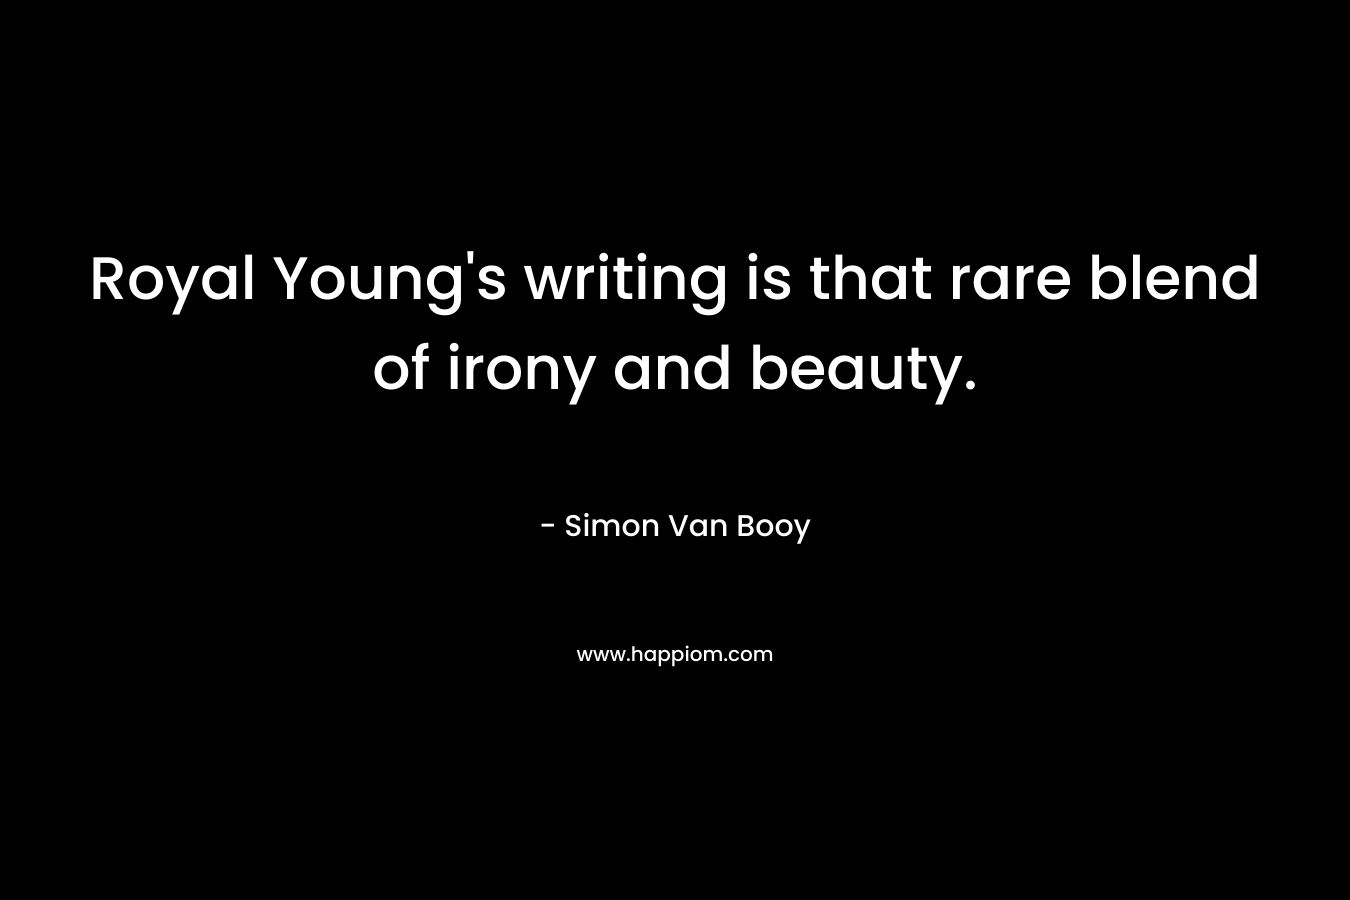 Royal Young’s writing is that rare blend of irony and beauty. – Simon Van Booy